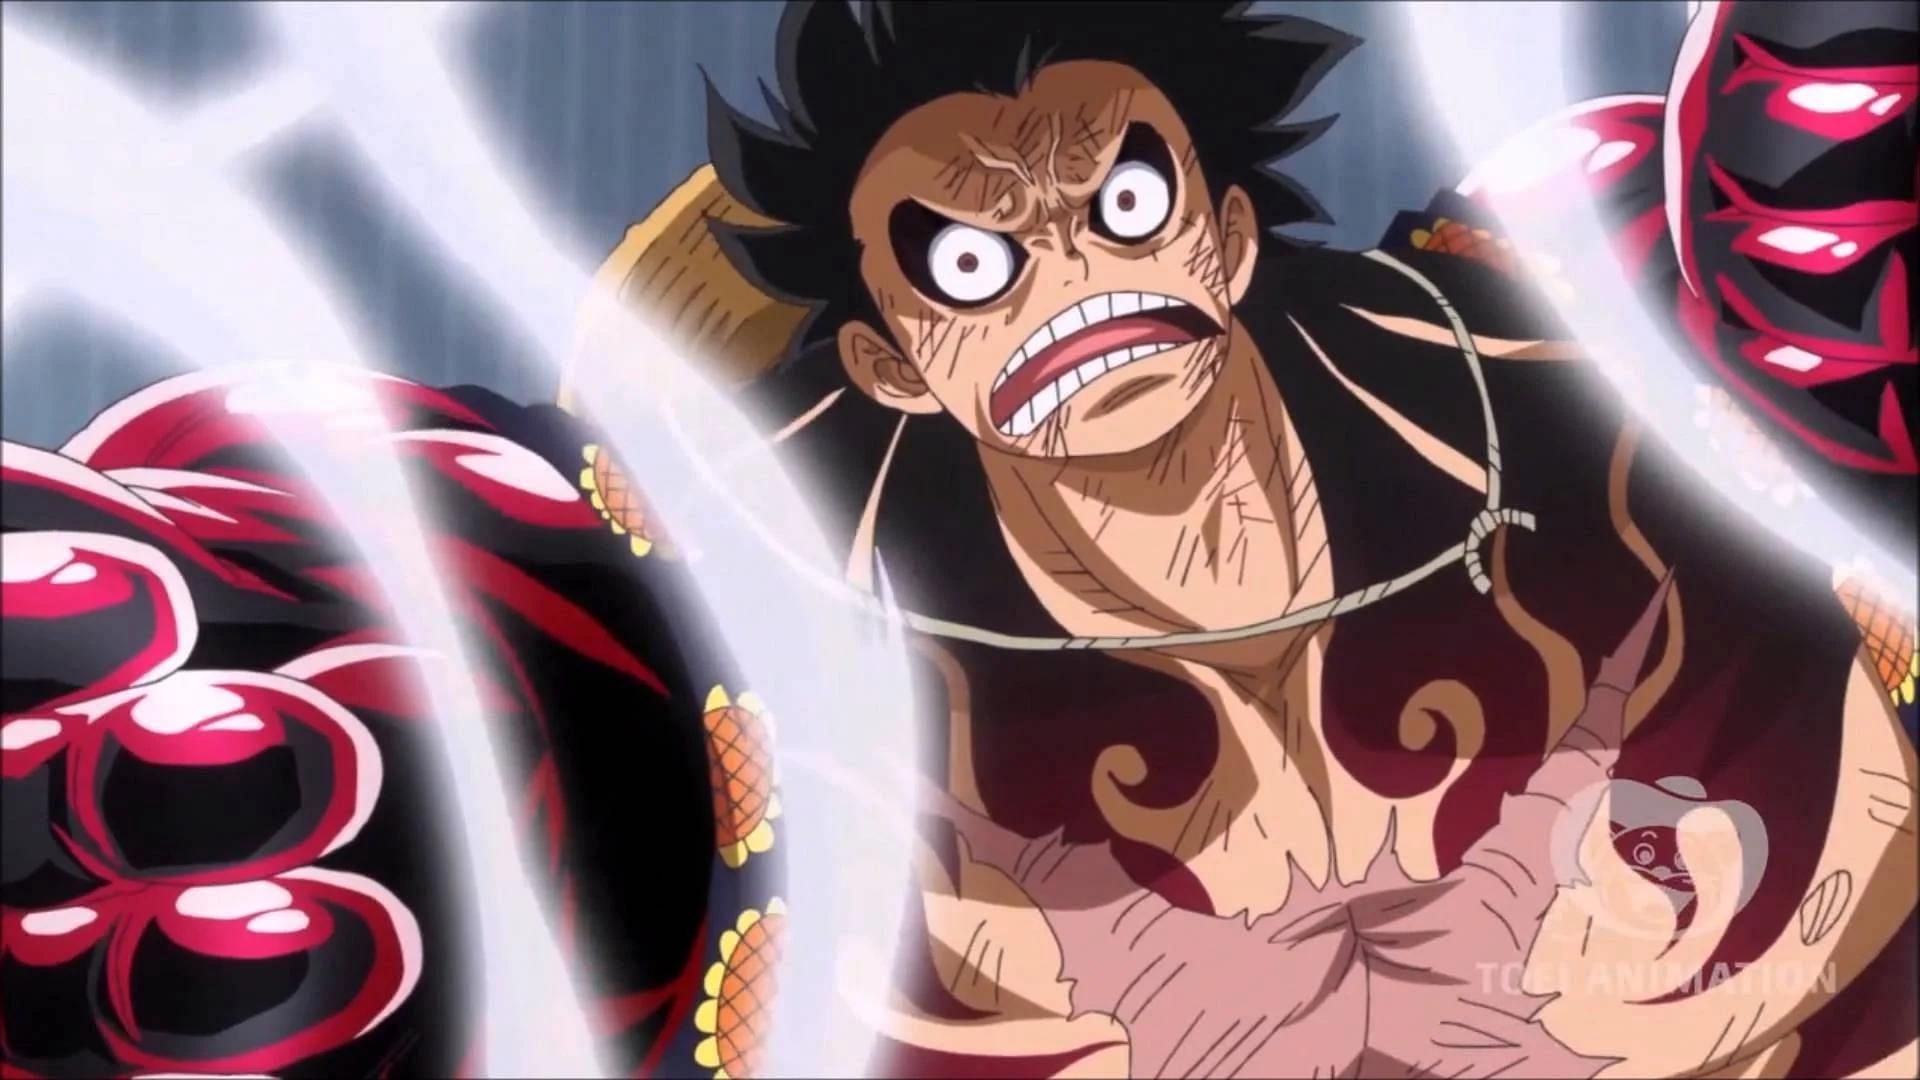 Gear 4 Luffy as shown in the anime series (Image via Toei Animation)